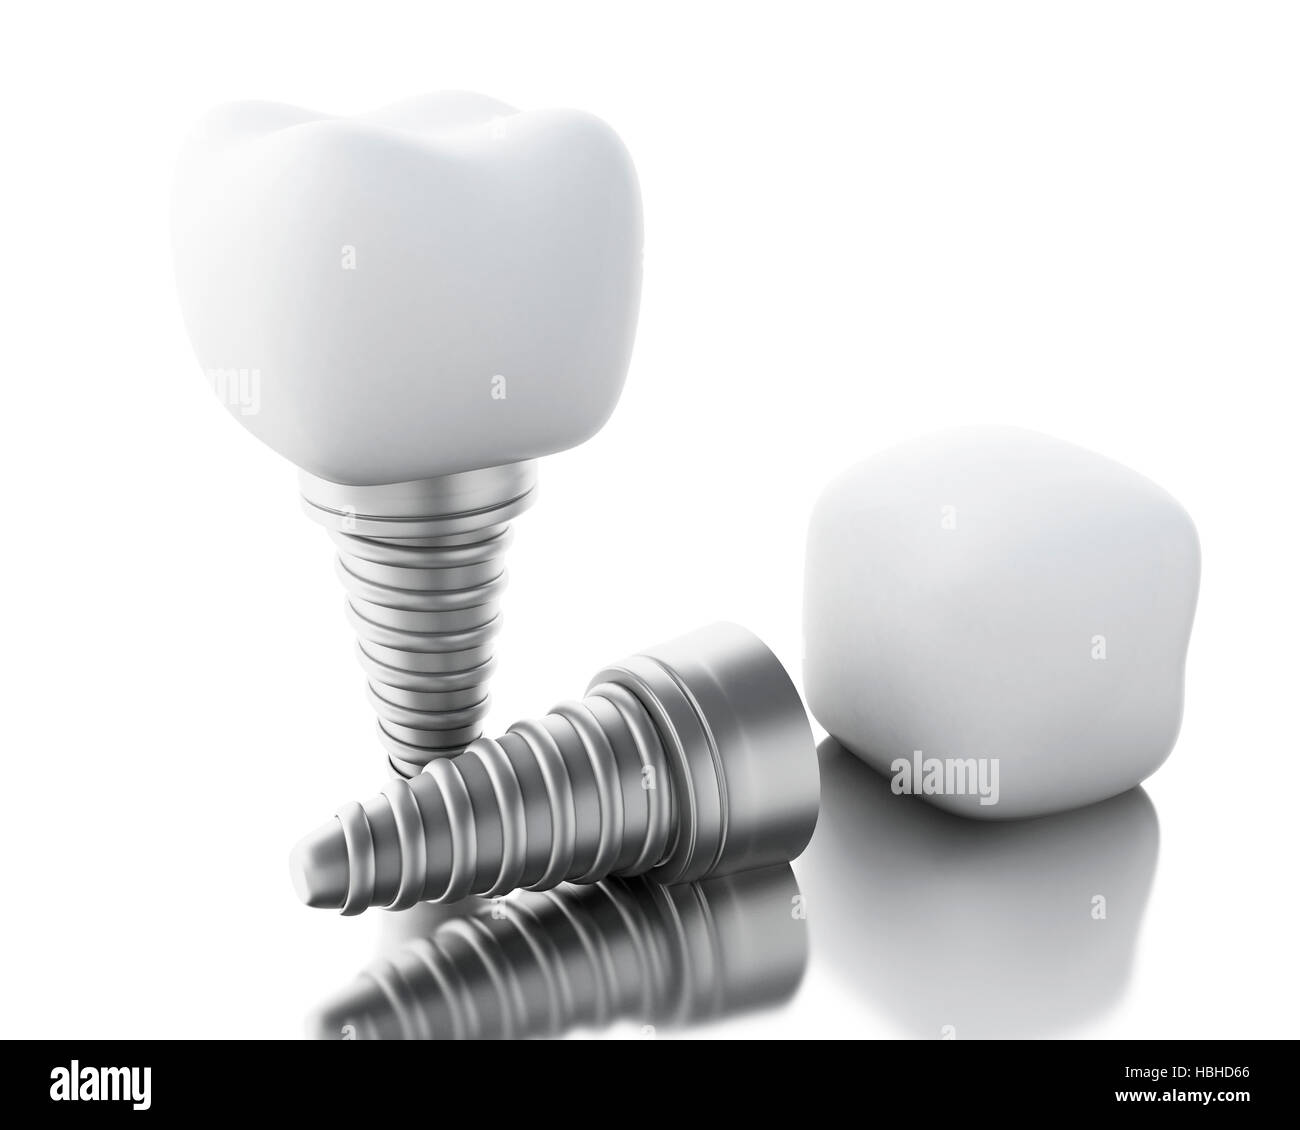 3D Illustration. Dental tooth implant. Dental care concept. Isolated white background. Stock Photo